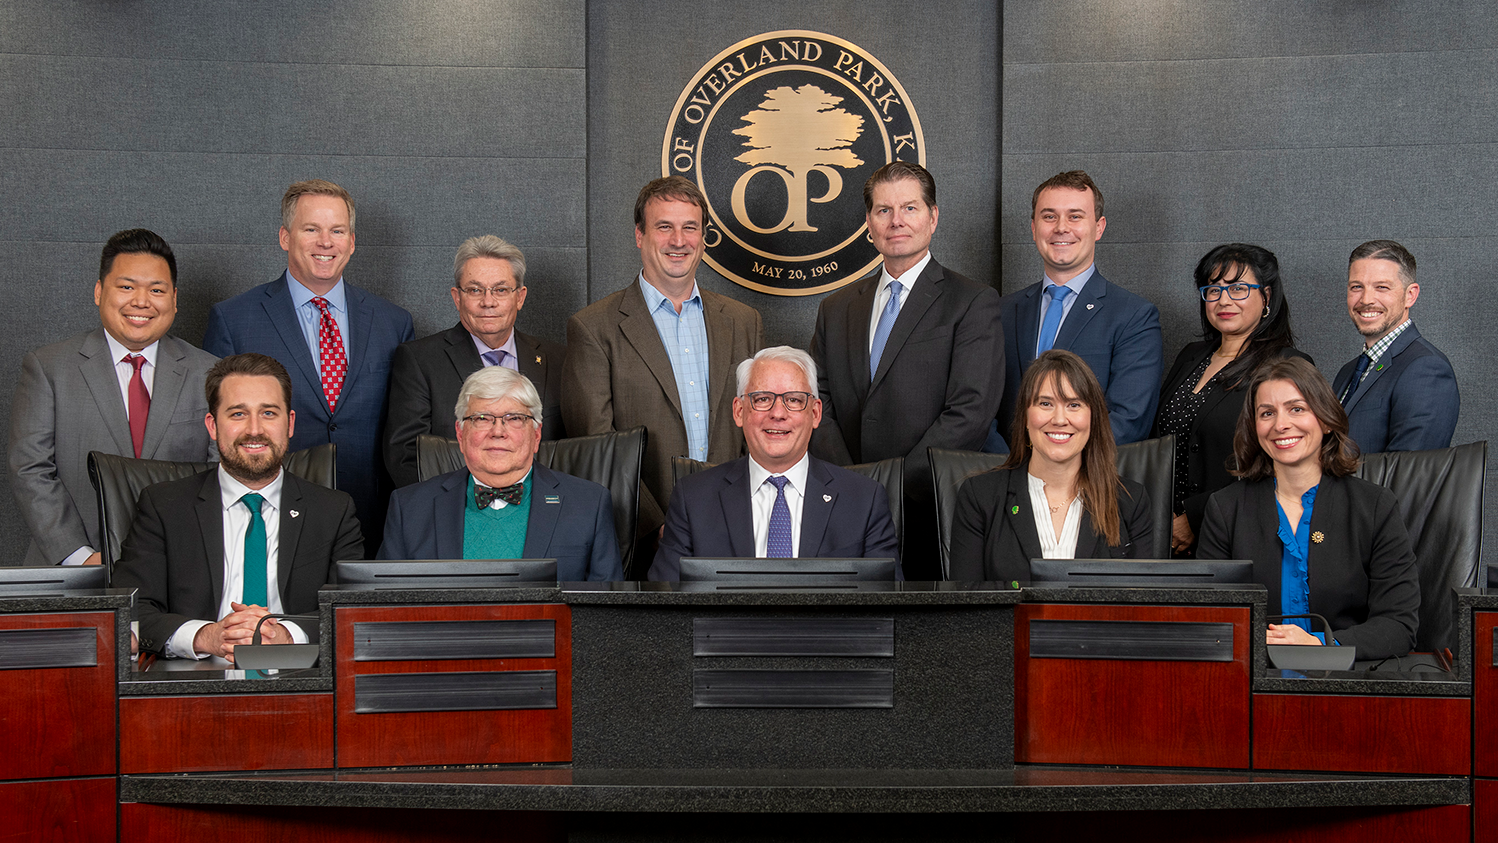 A formal posted photo of the Overland Park Governing Body.